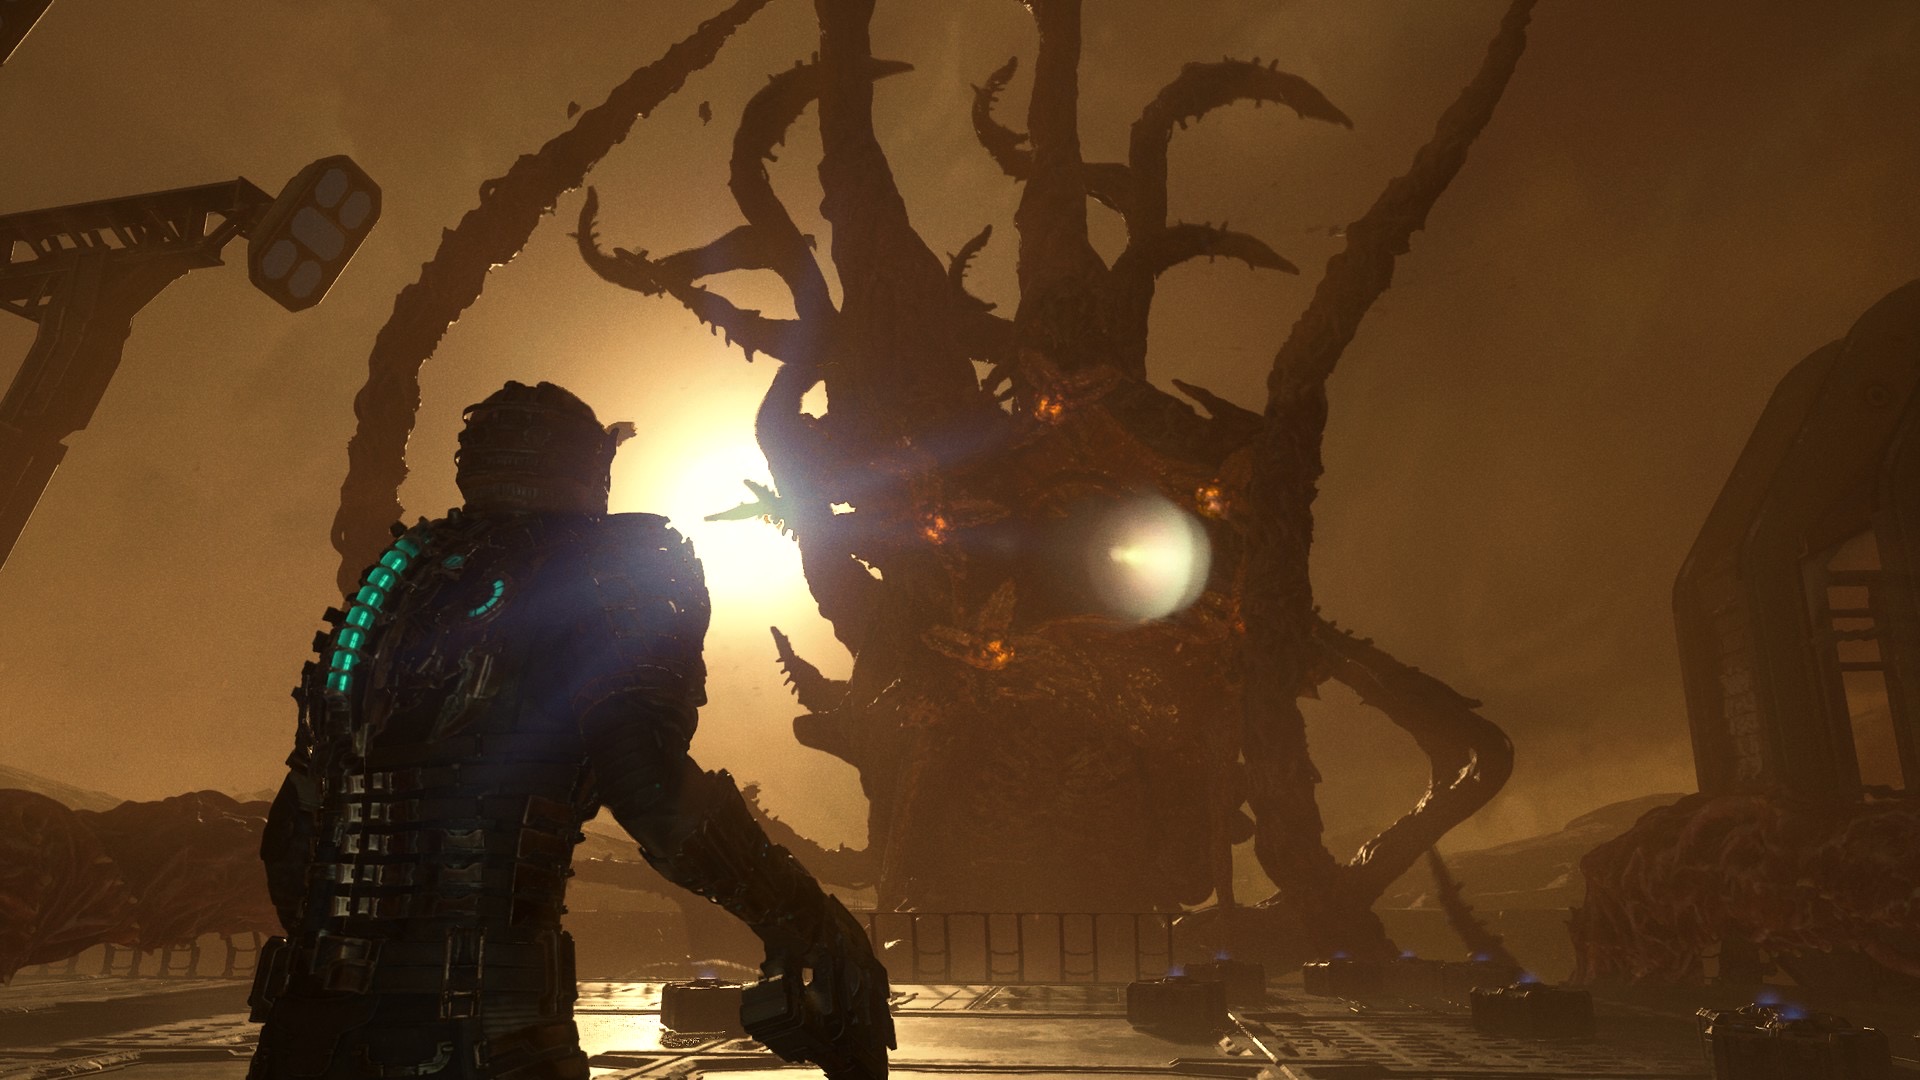 Sinis kindben Oversigt Dead Space Remake: How to Beat the Hive Mind Boss Fight - Gameranx